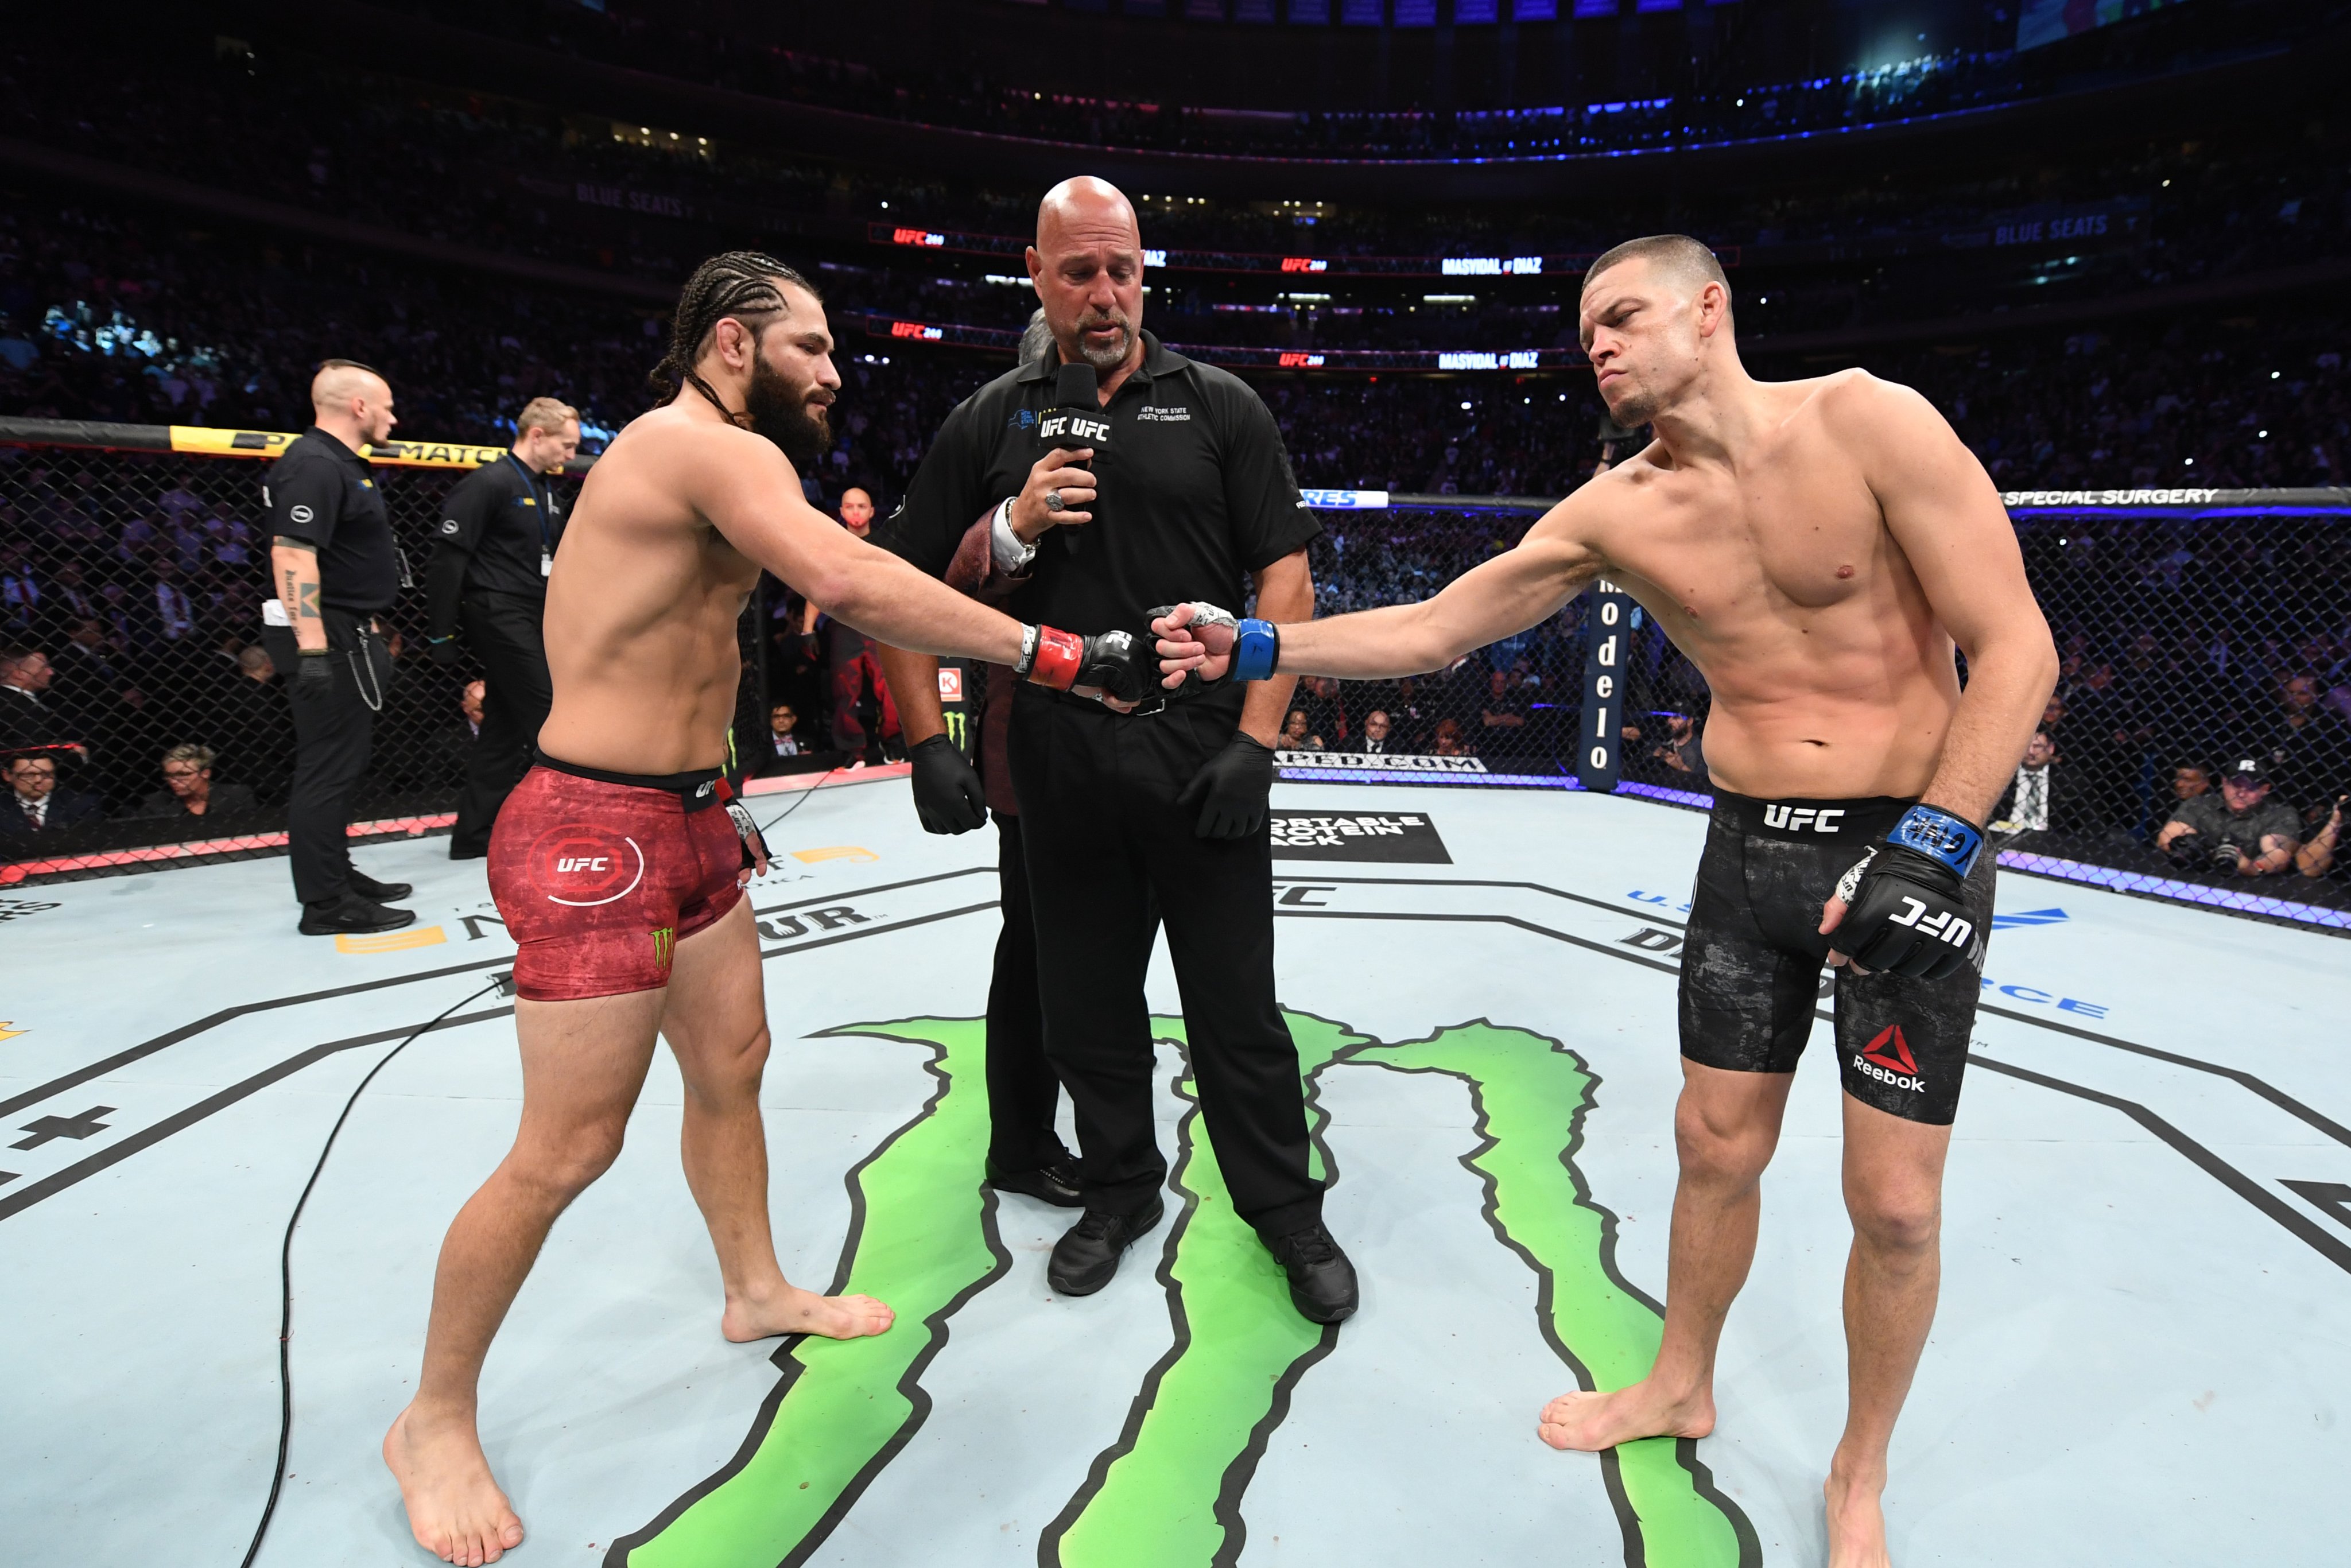 Jorge Masvidal and Nate Diaz touch gloves before their contest for the UFC "BMF" title (UFC/Getty Images)